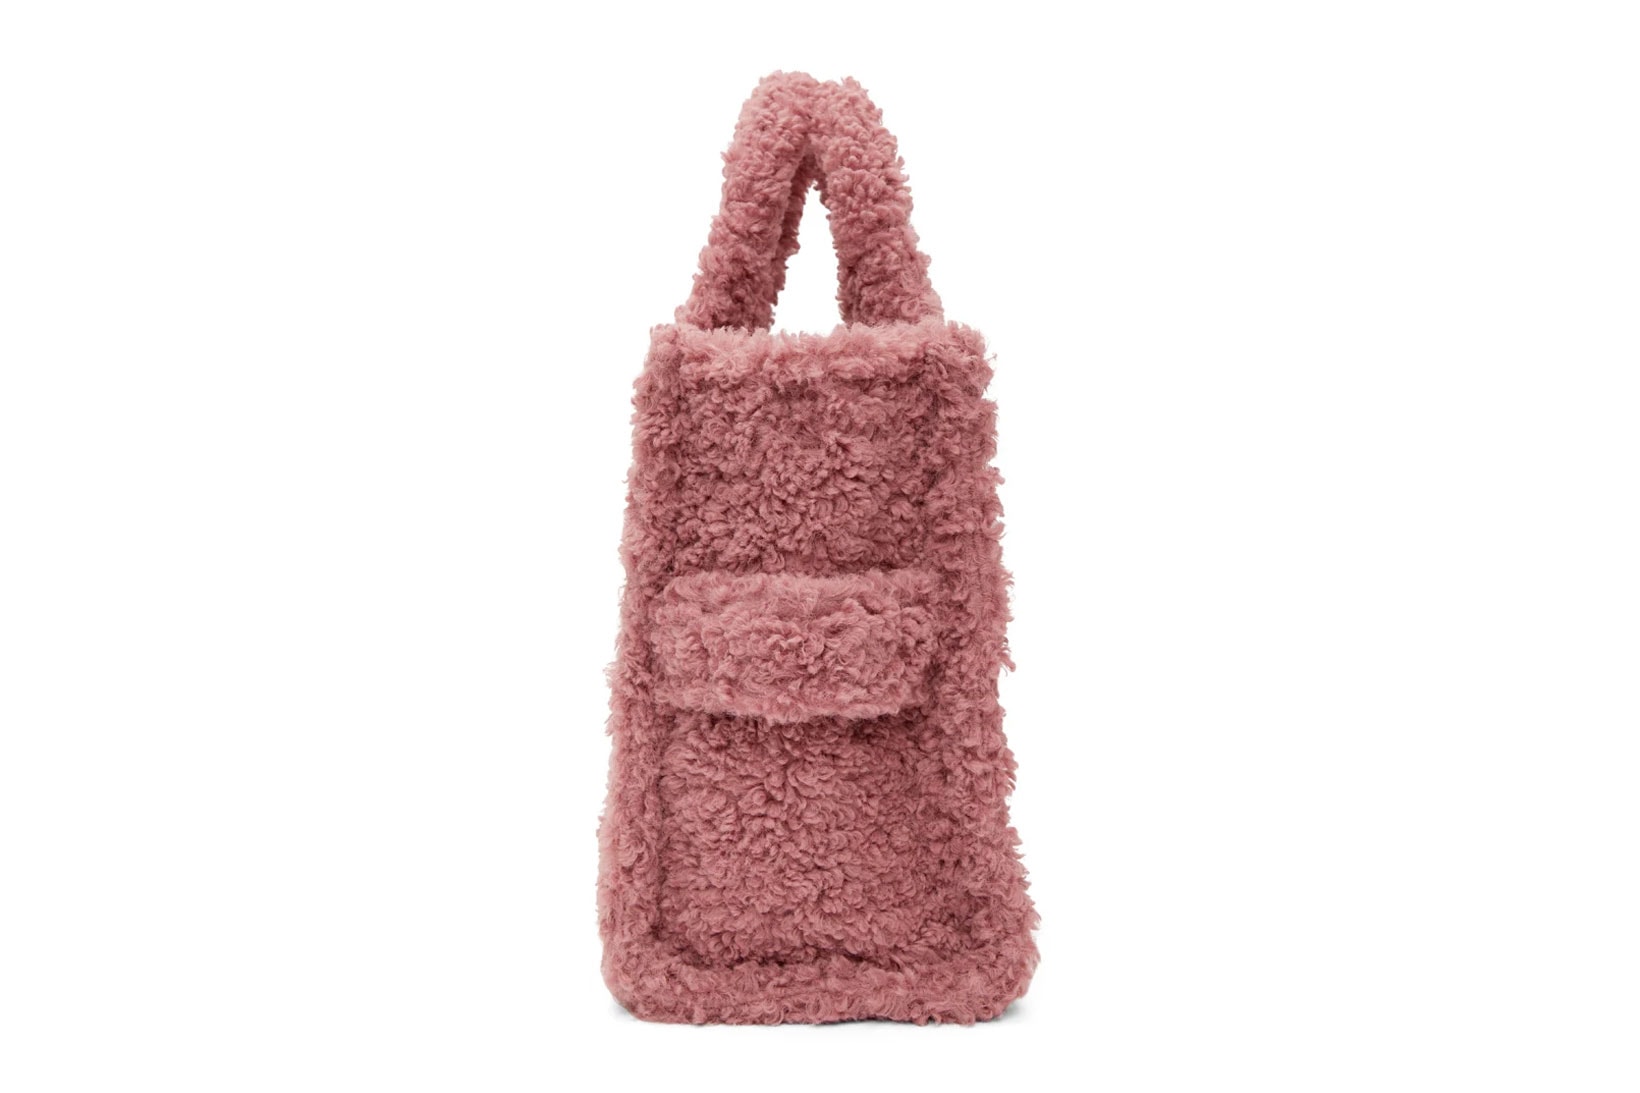 marc jacobs sherpa tote bag the small traveler pink blue black fall winter accessories price